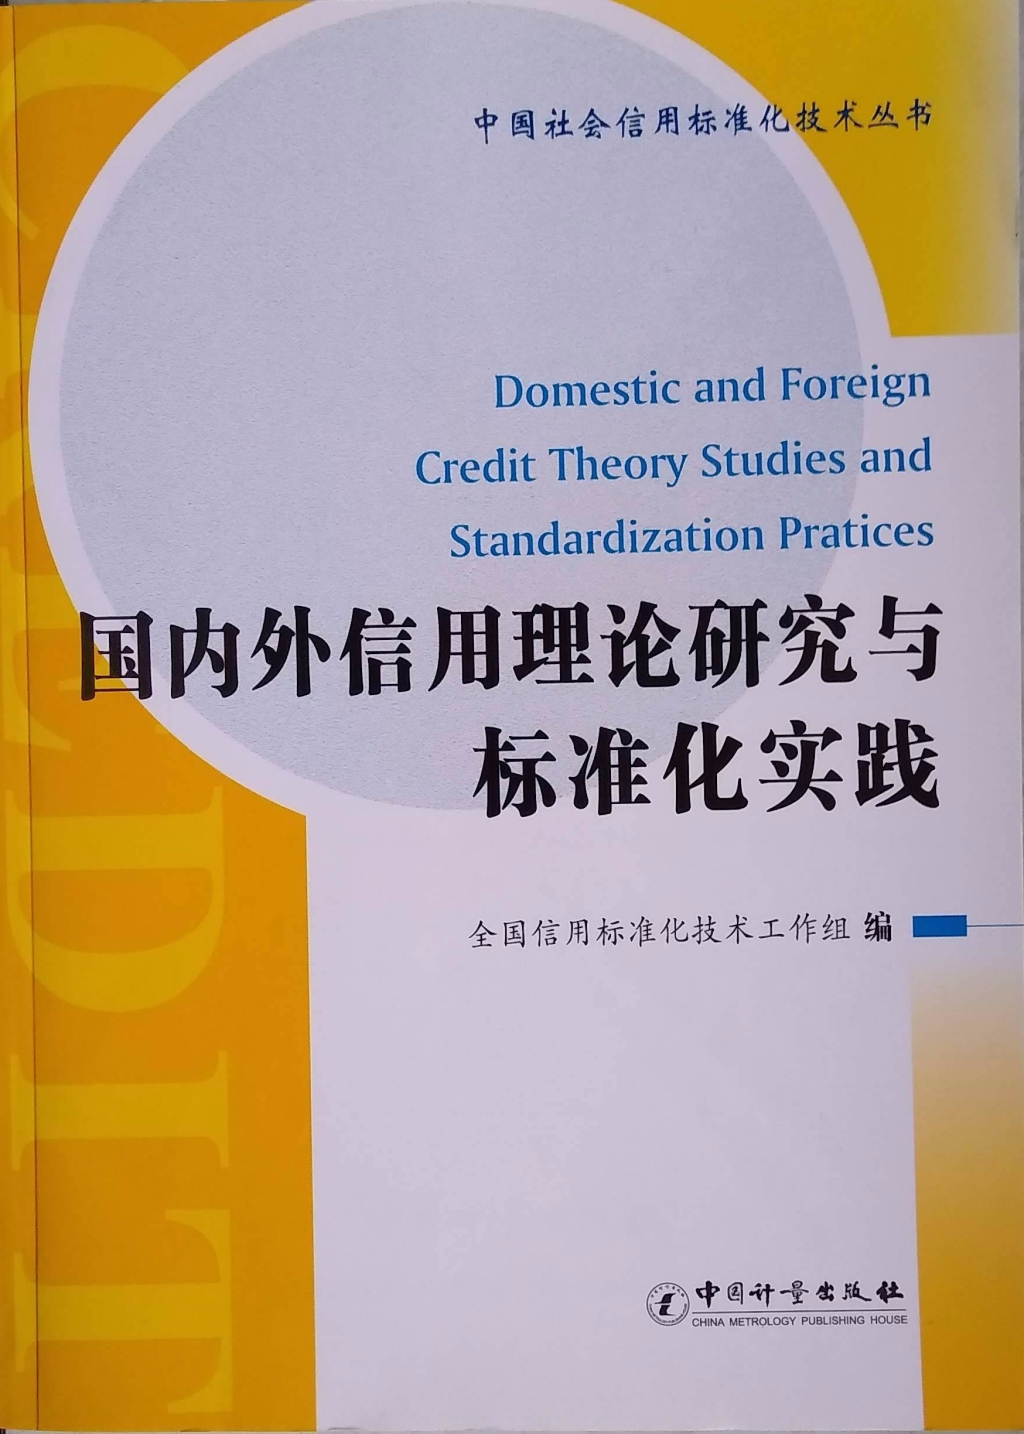 Domestic and Foreign Credit Theory Studies and Standardization Practices